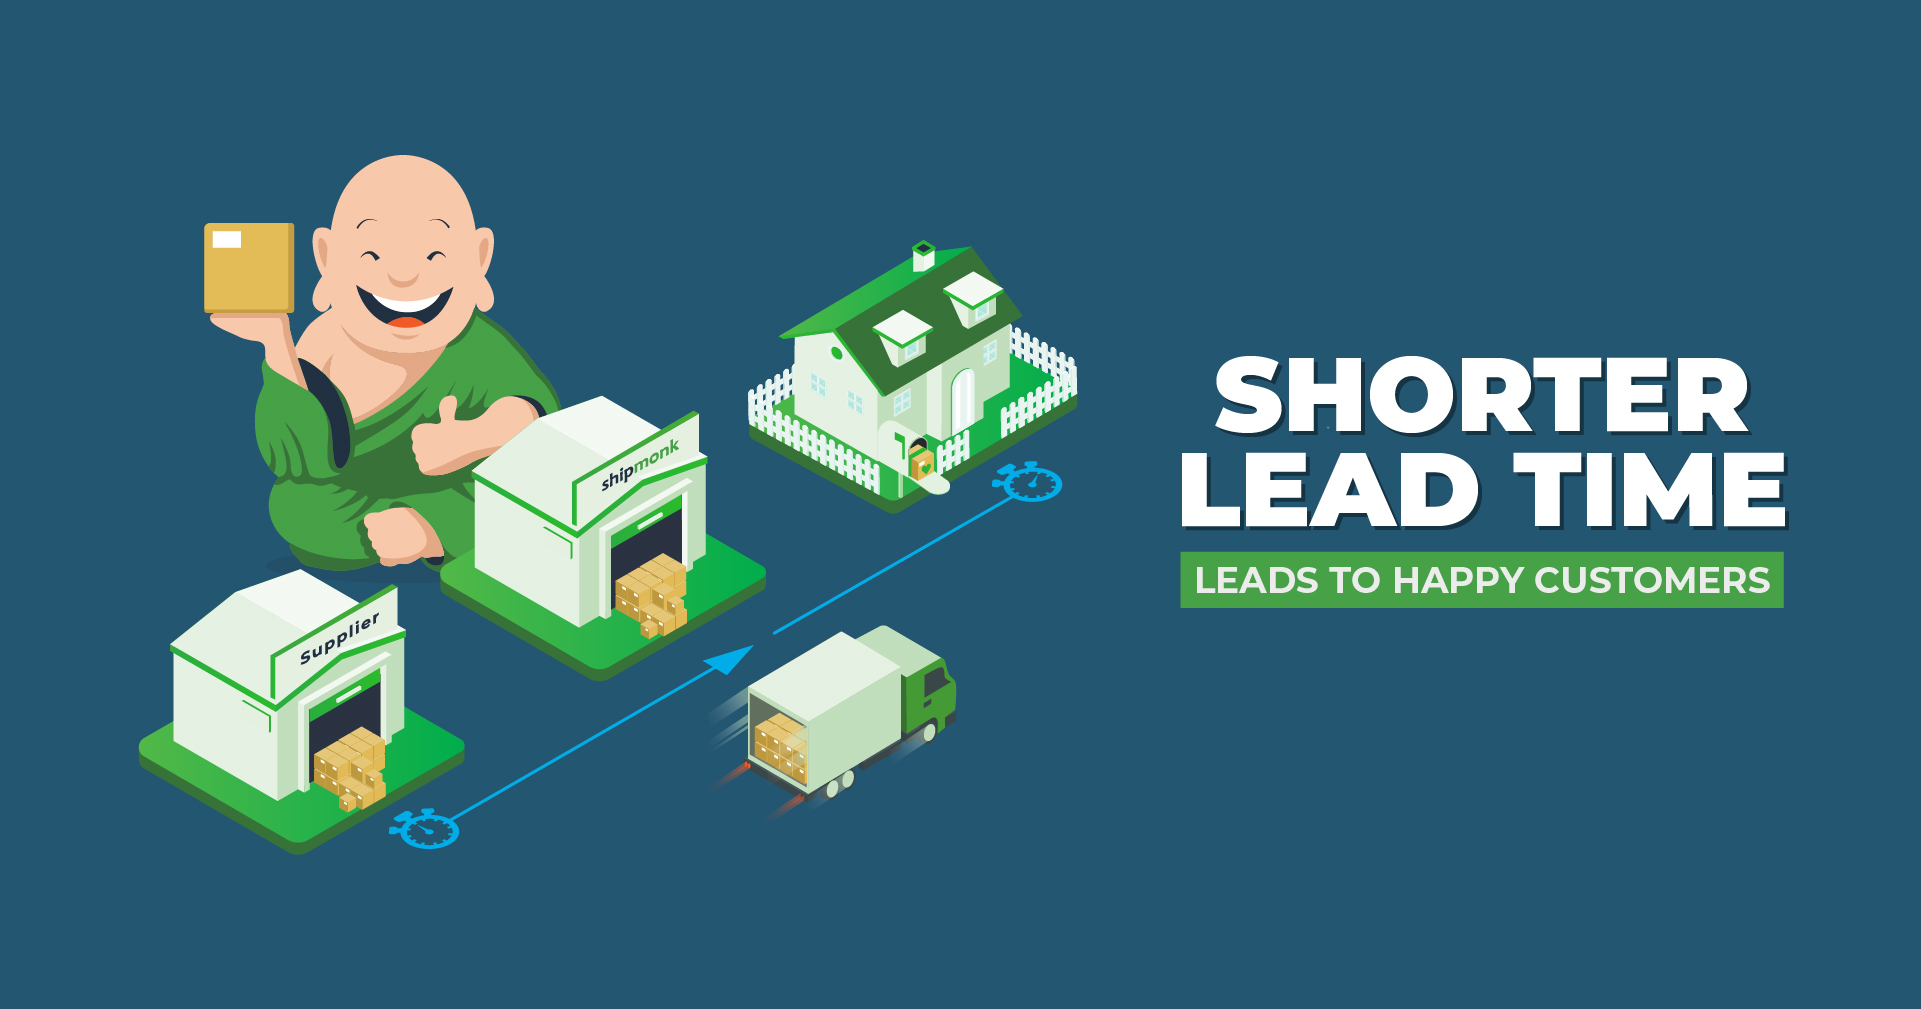 Shorter Lead Time Leads to Happy Customers